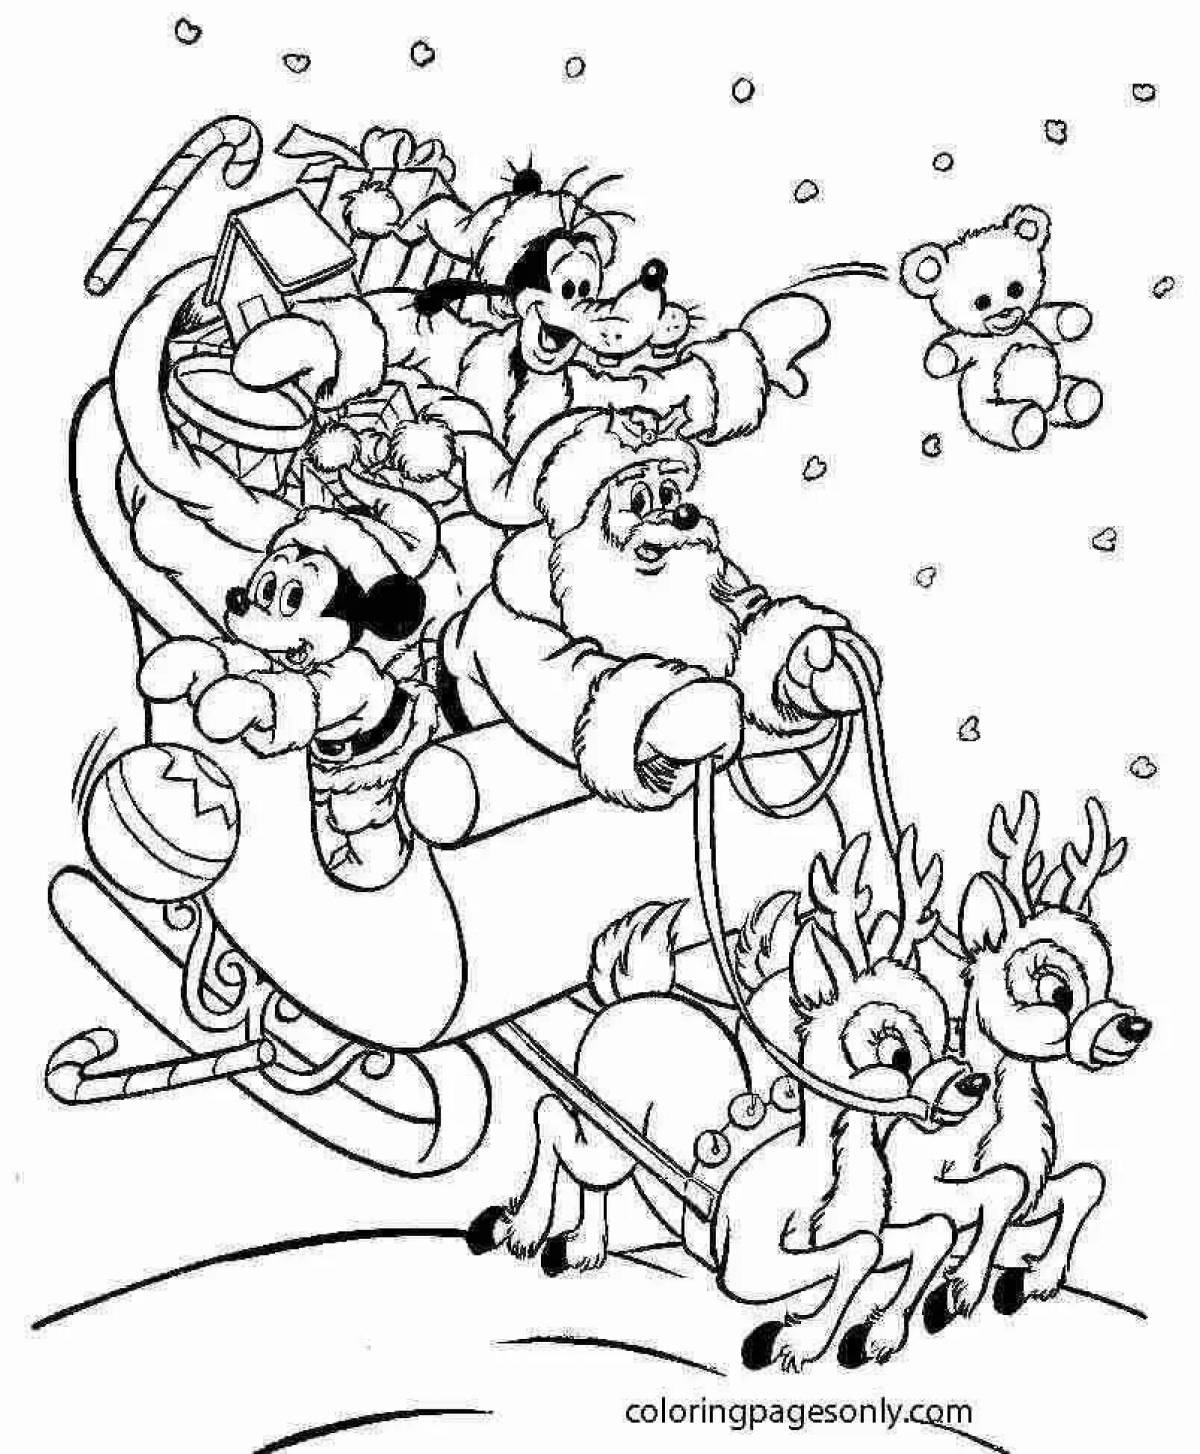 Disney deluxe christmas coloring book